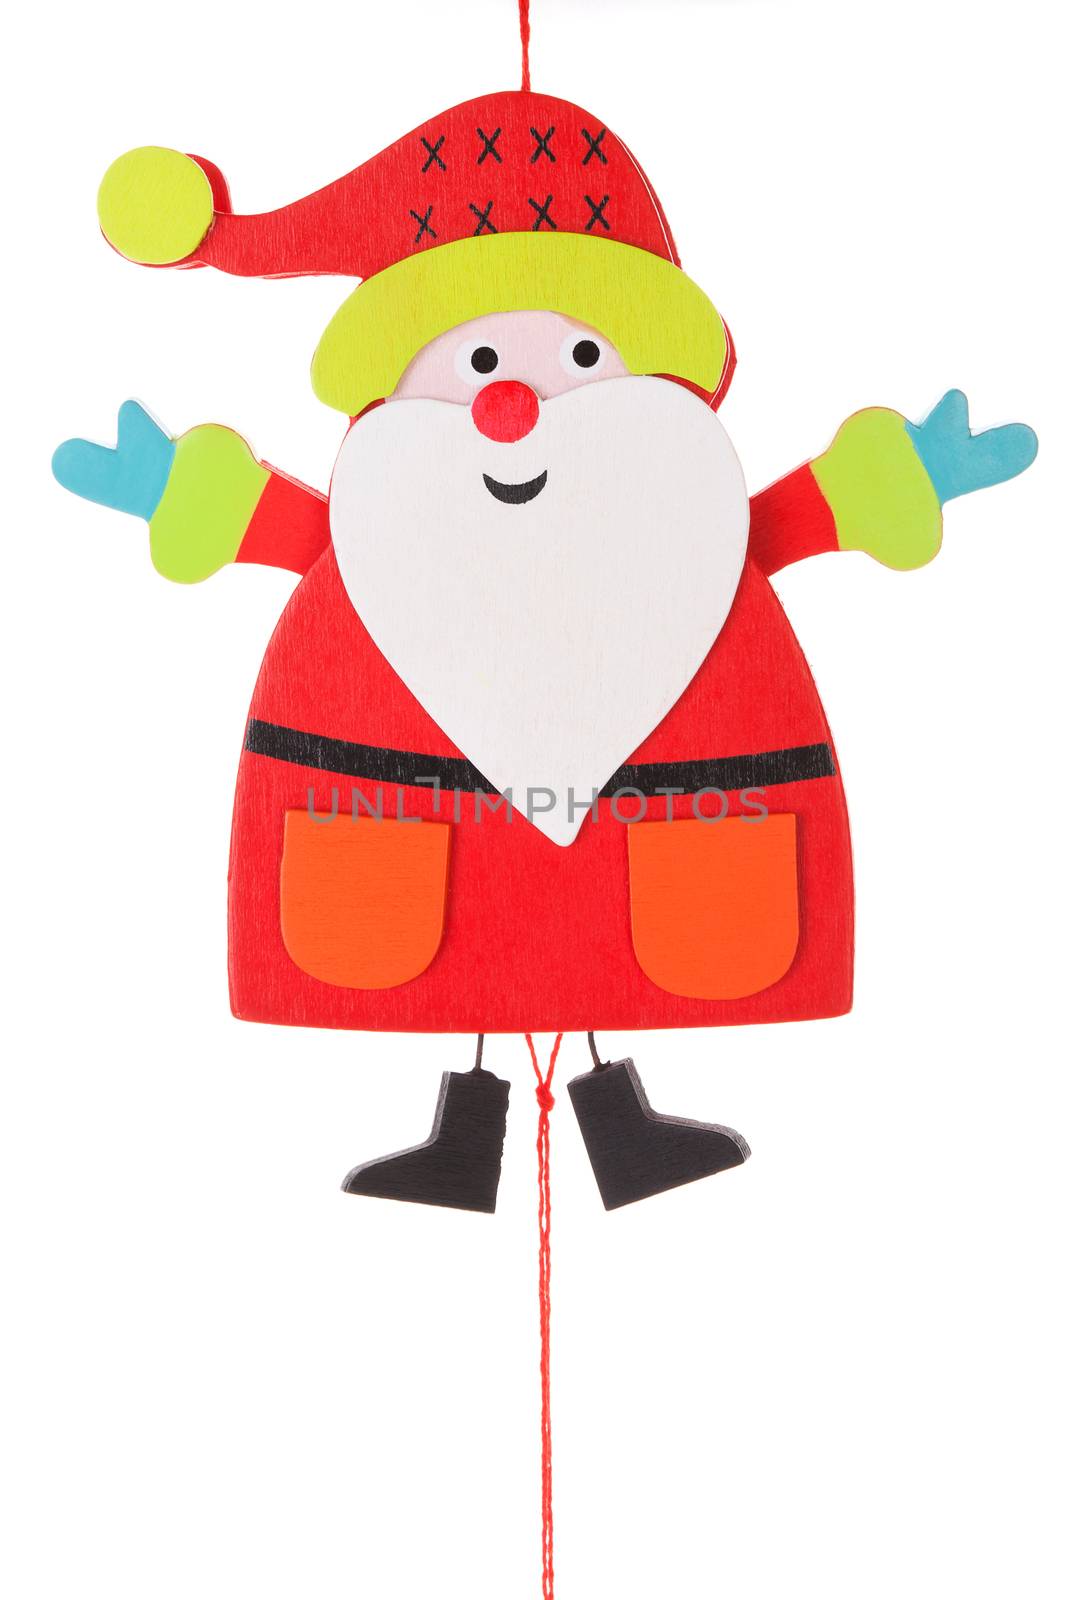 Santa claus wooden figure isolated on white background. Christmas concept.